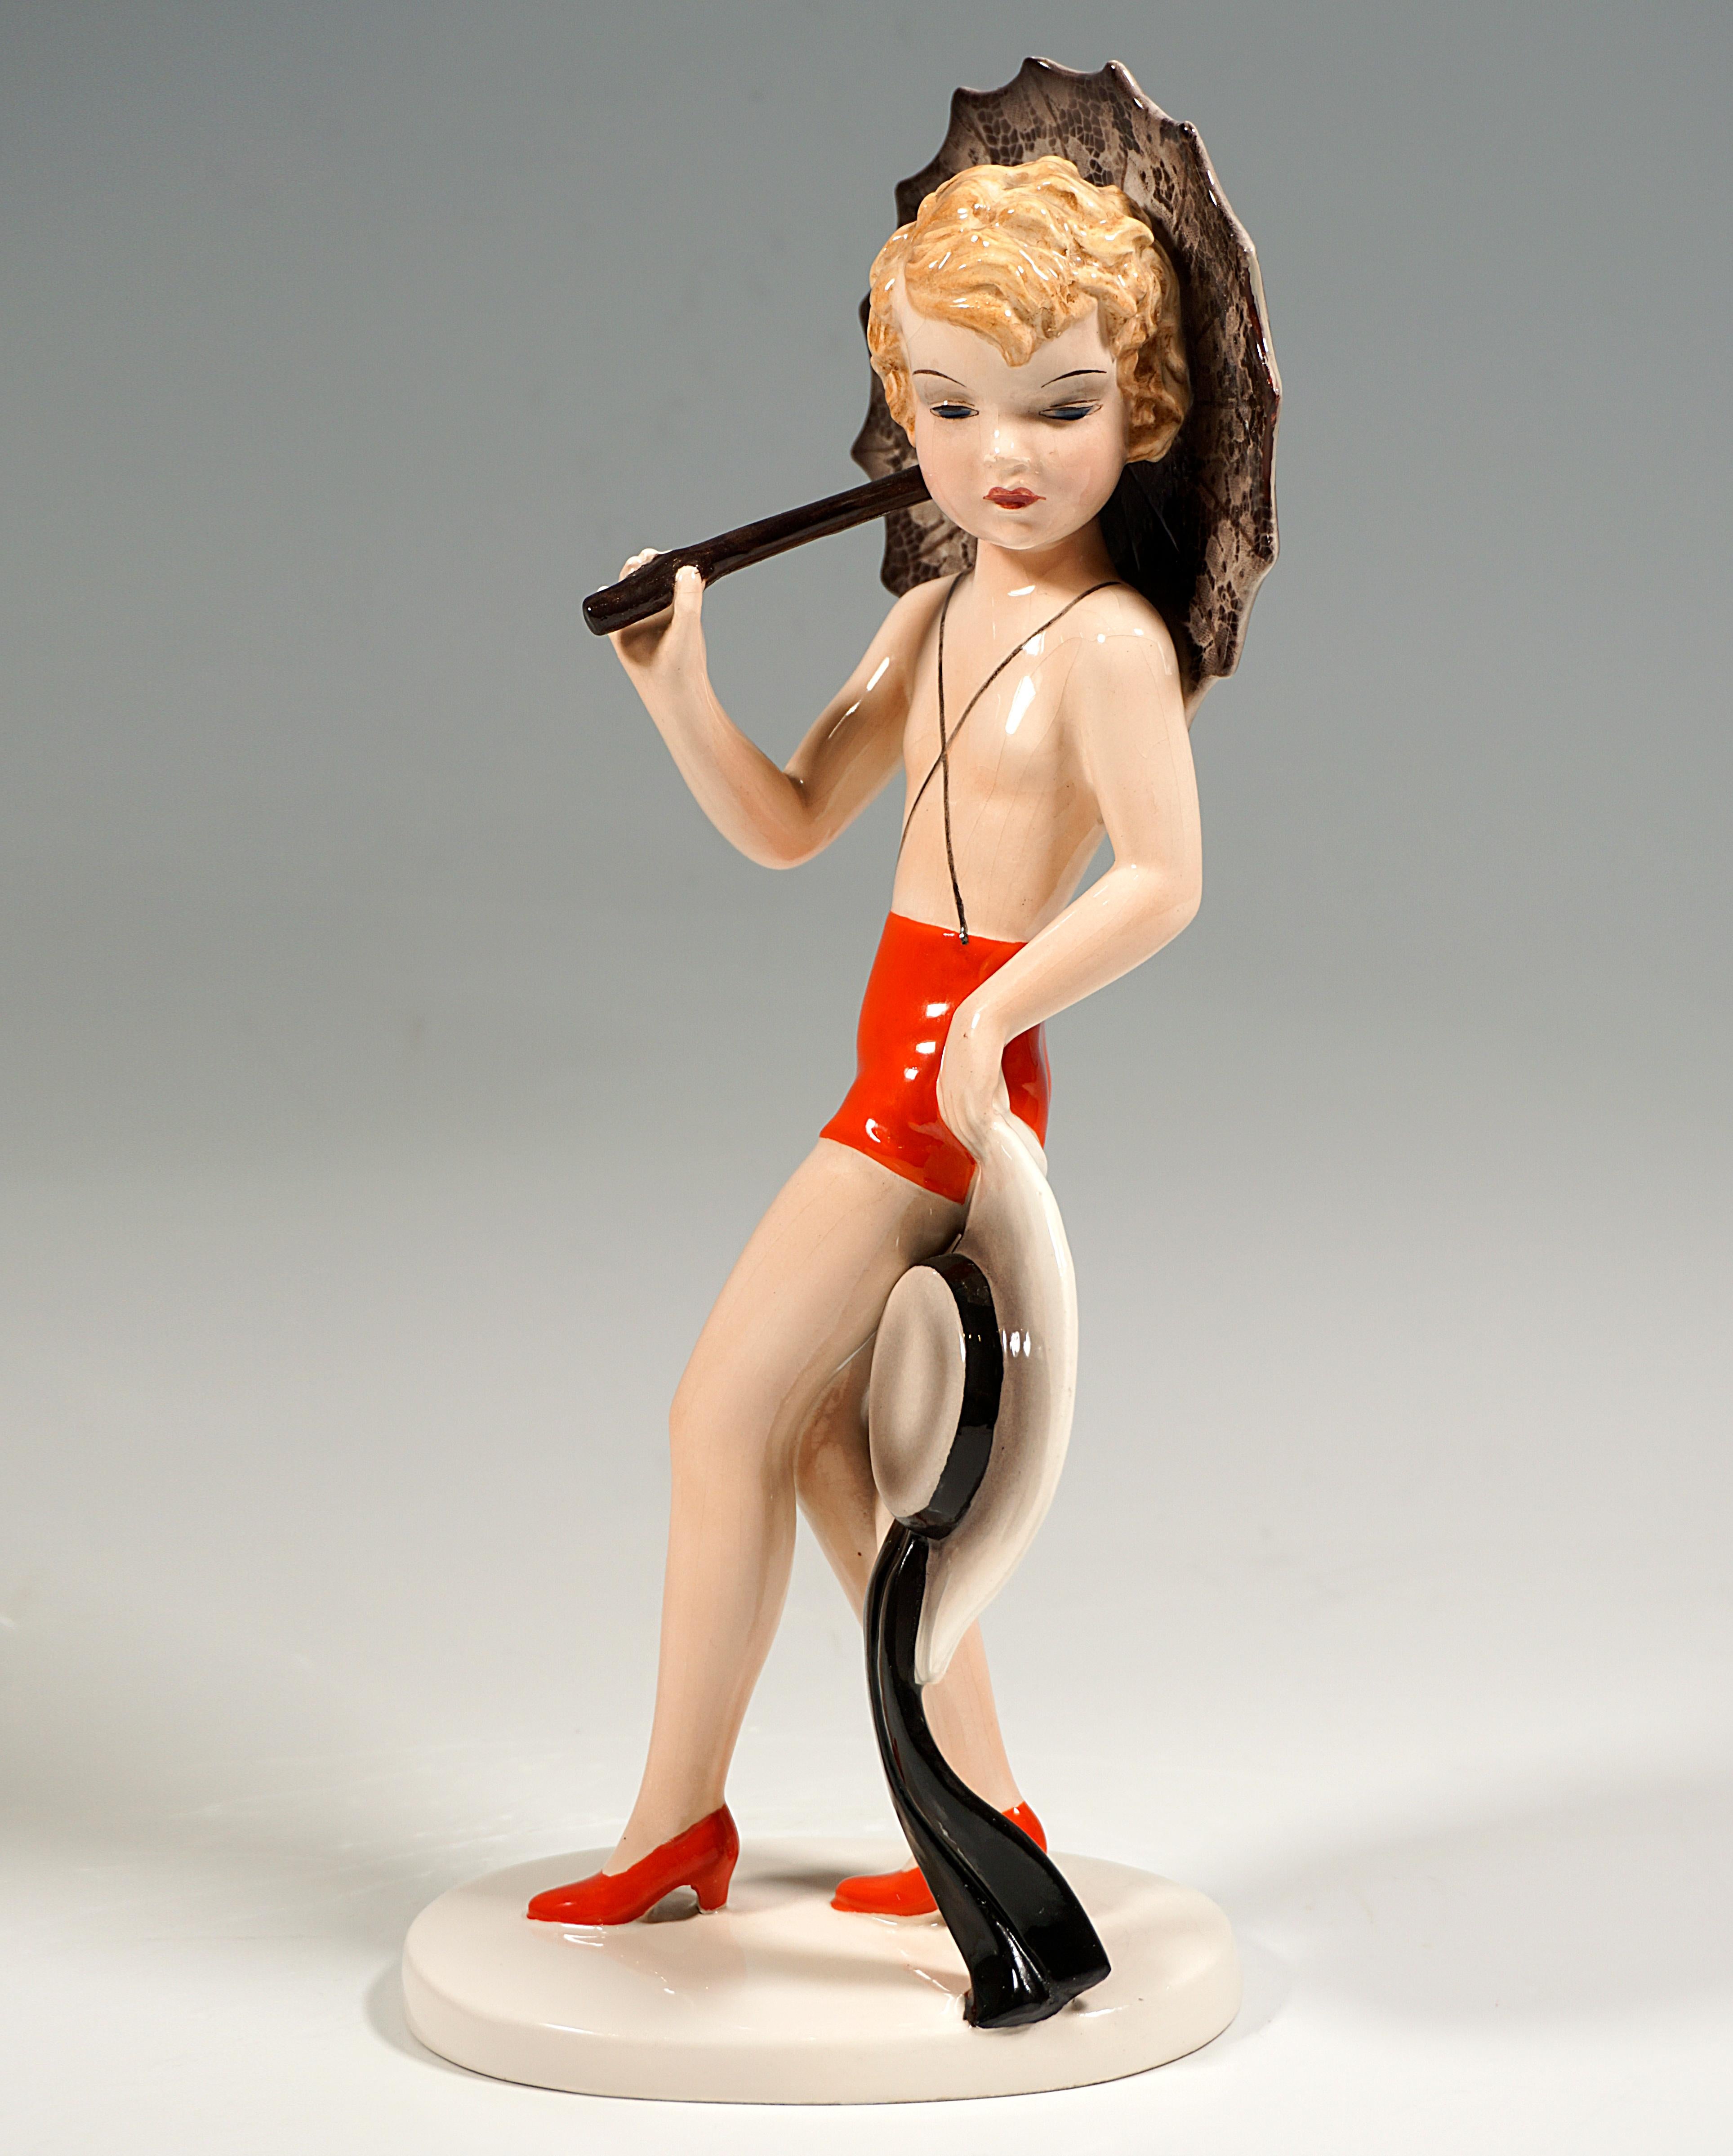 Extremely Rare Goldscheider Art Déco Ceramic Model Of The 1930s:
Blonde young girl, dressed only in red shorts with crossed suspenders and red heels, posing with a black lace umbrella and a large beige hat.
On an oval, cream-colored flat base,